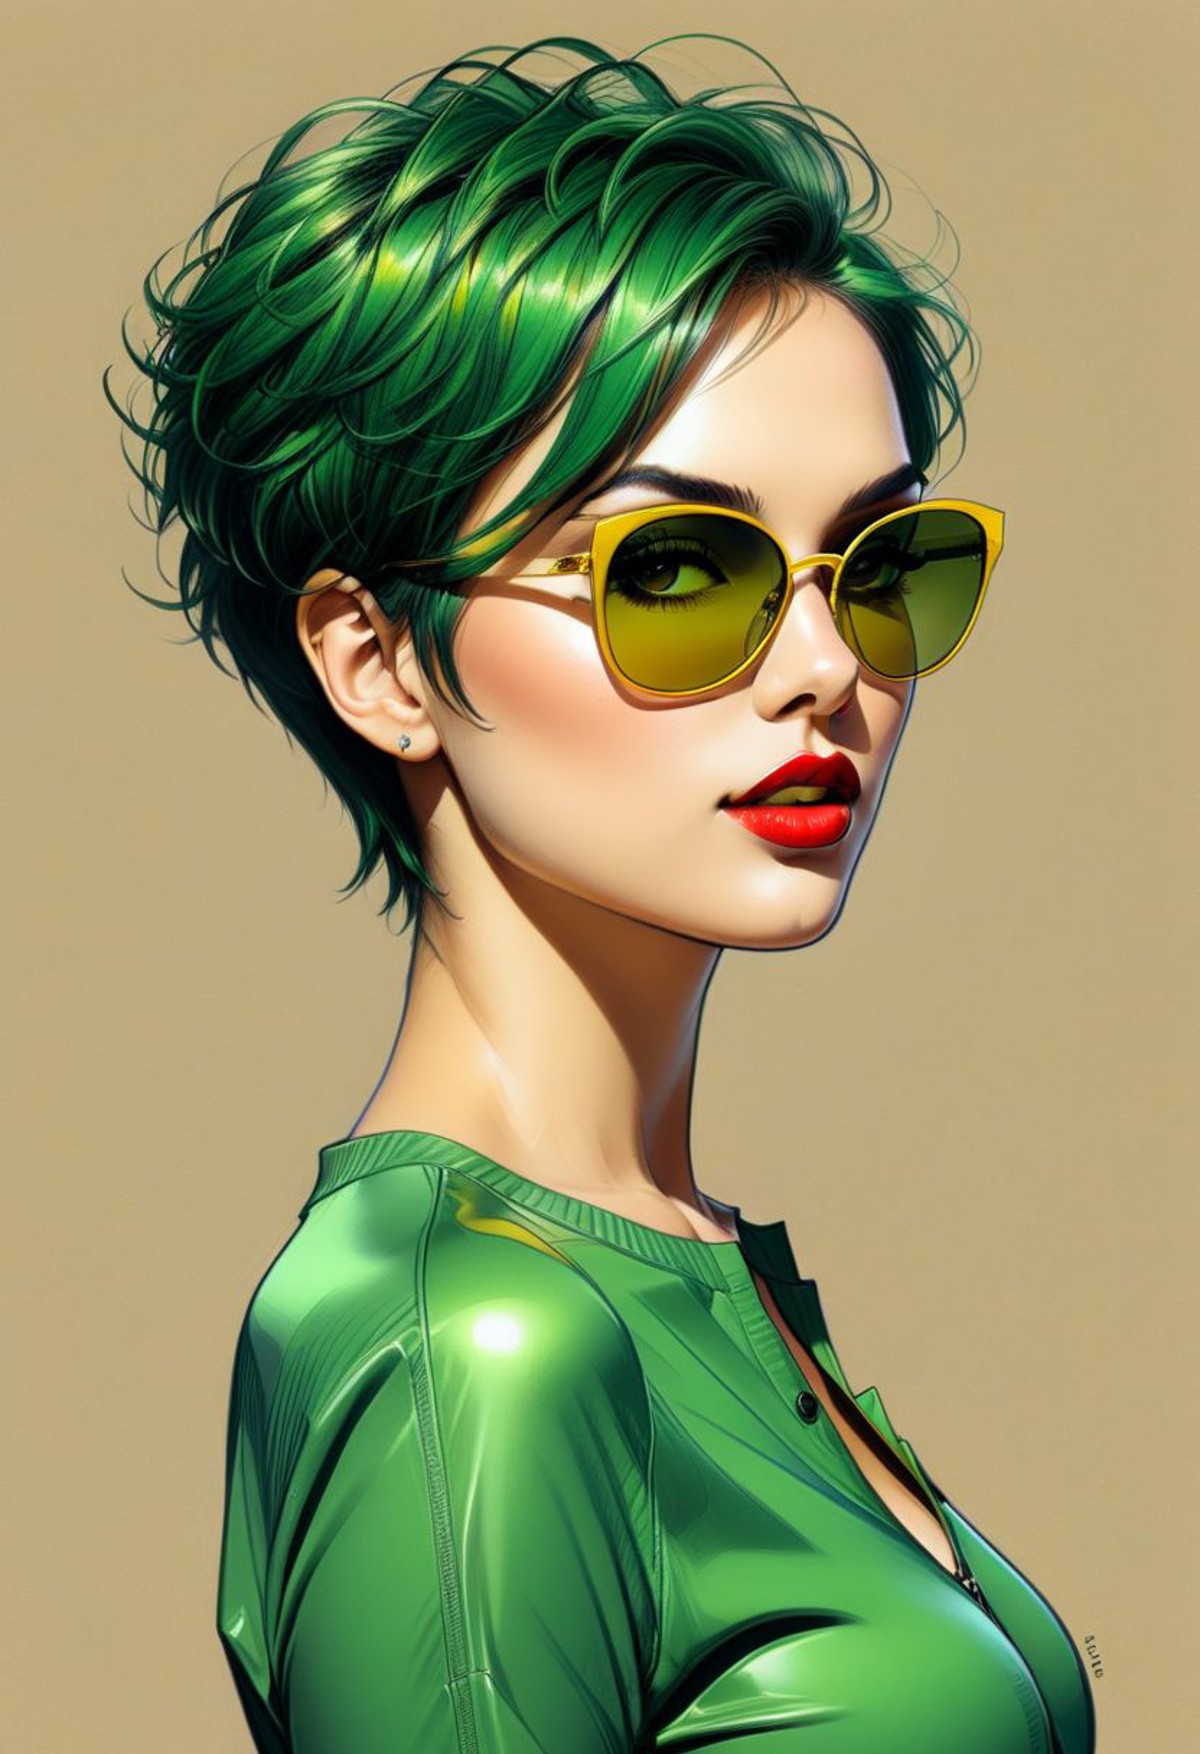 pencil Sketch of a beautiful profile athletic woman 30 years old, green short hair, yellow shades, sunglasses, disheveled ...